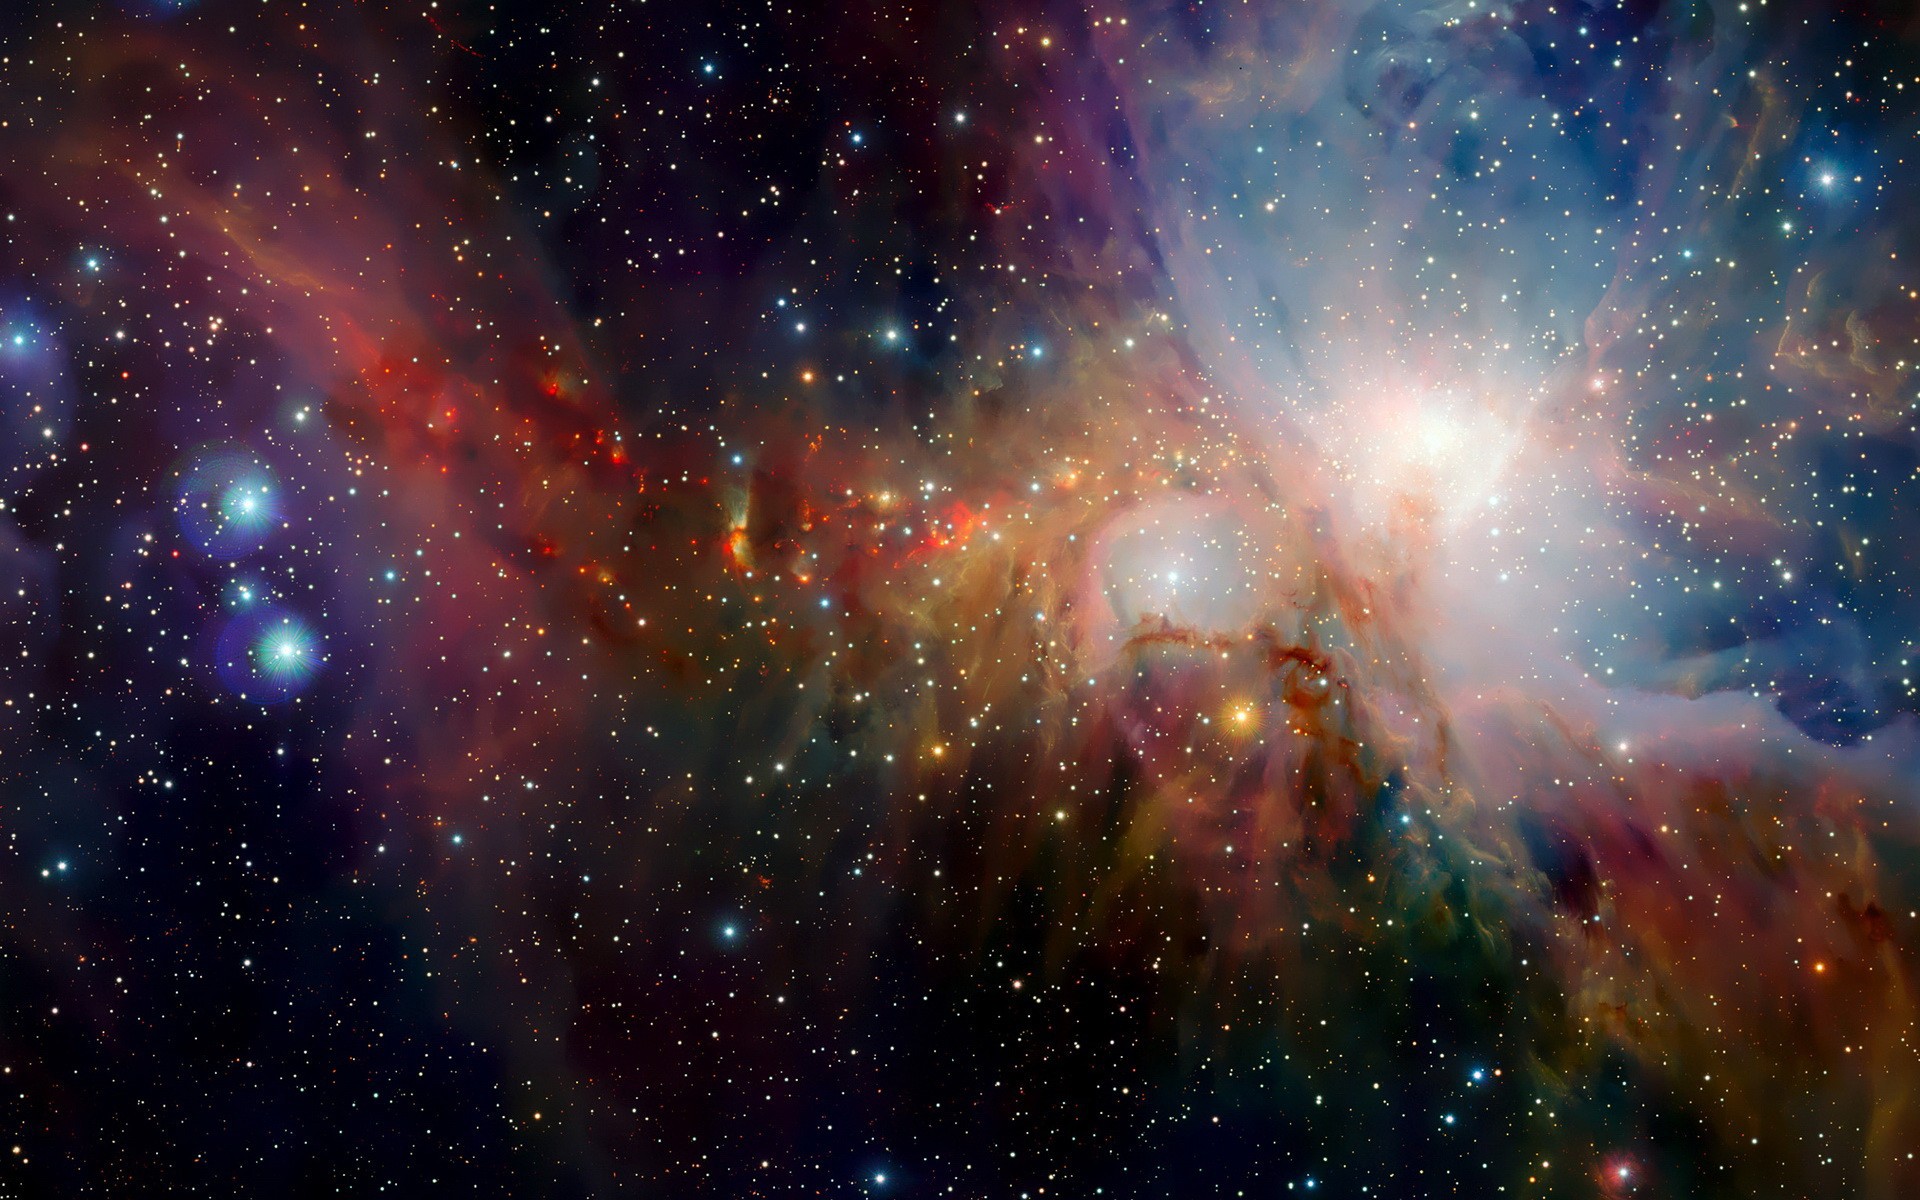 Outer Space - HD Wallpaper 